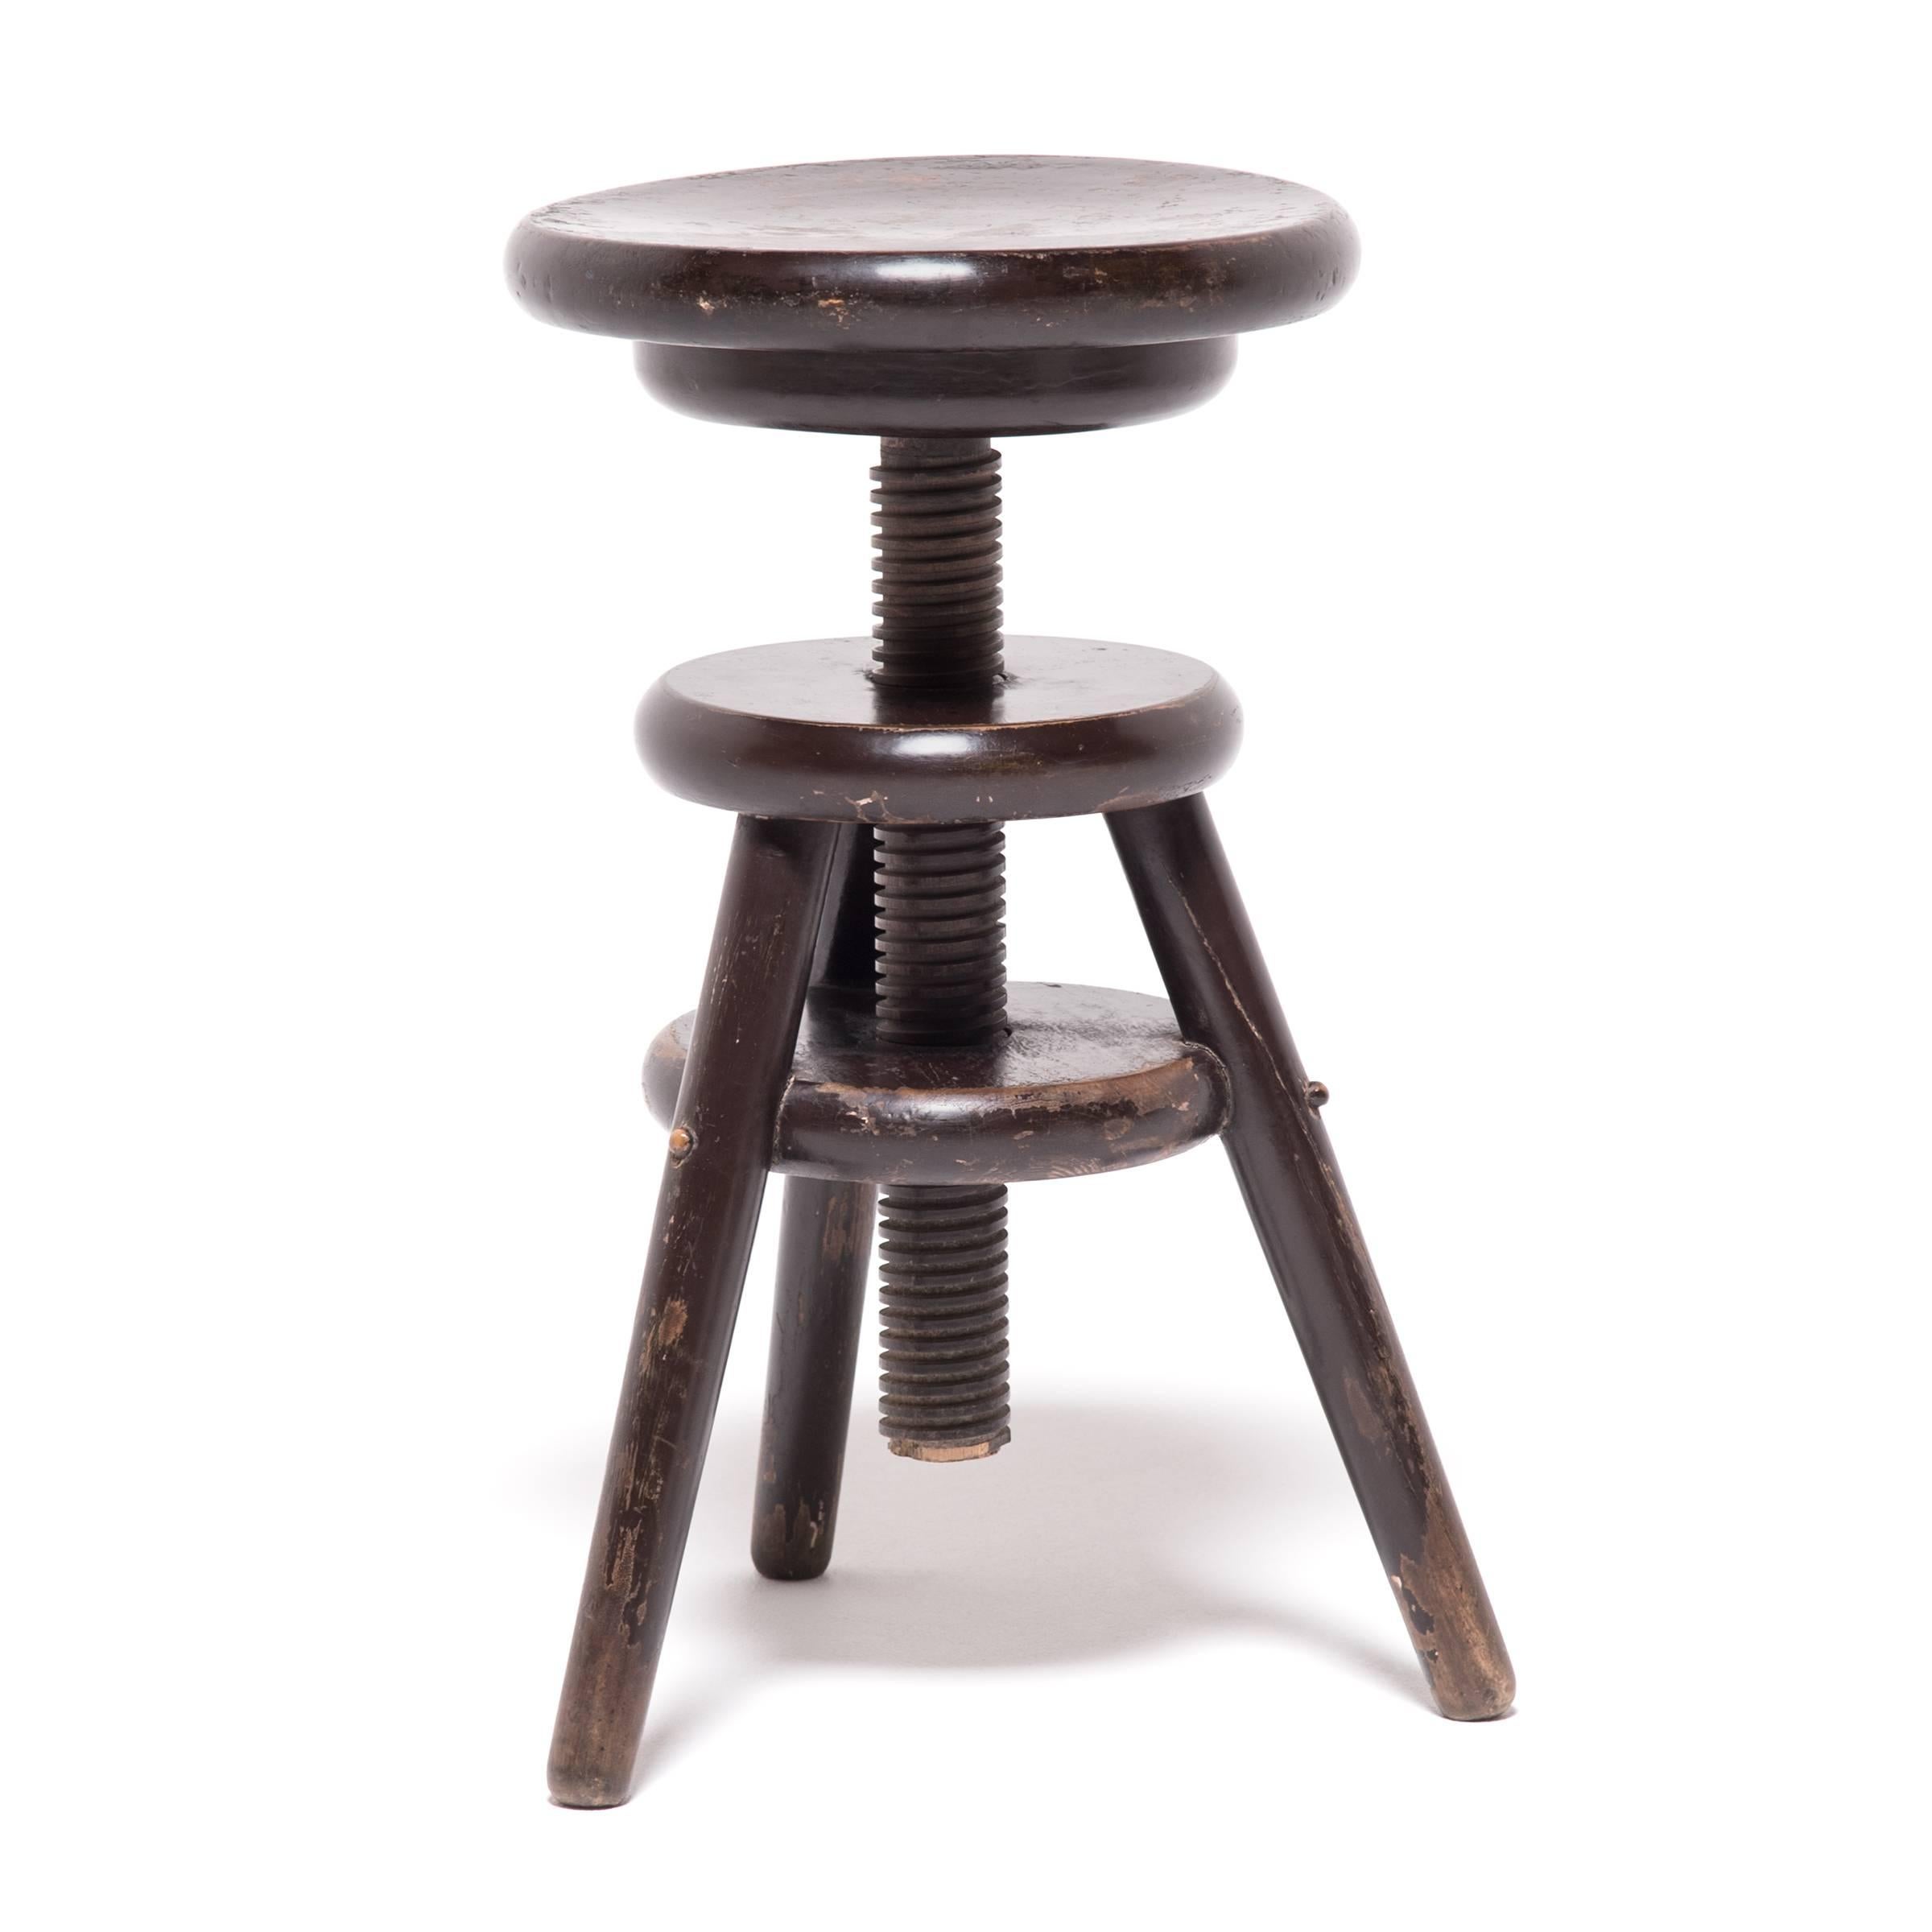 It is unusual to see an early 20th century Chinese round stool with adjustable height. The artisan who created this inventive stool hand-carved the cylindrical center post for easy adjustment. Soundly held together with masterful mortise and tenon